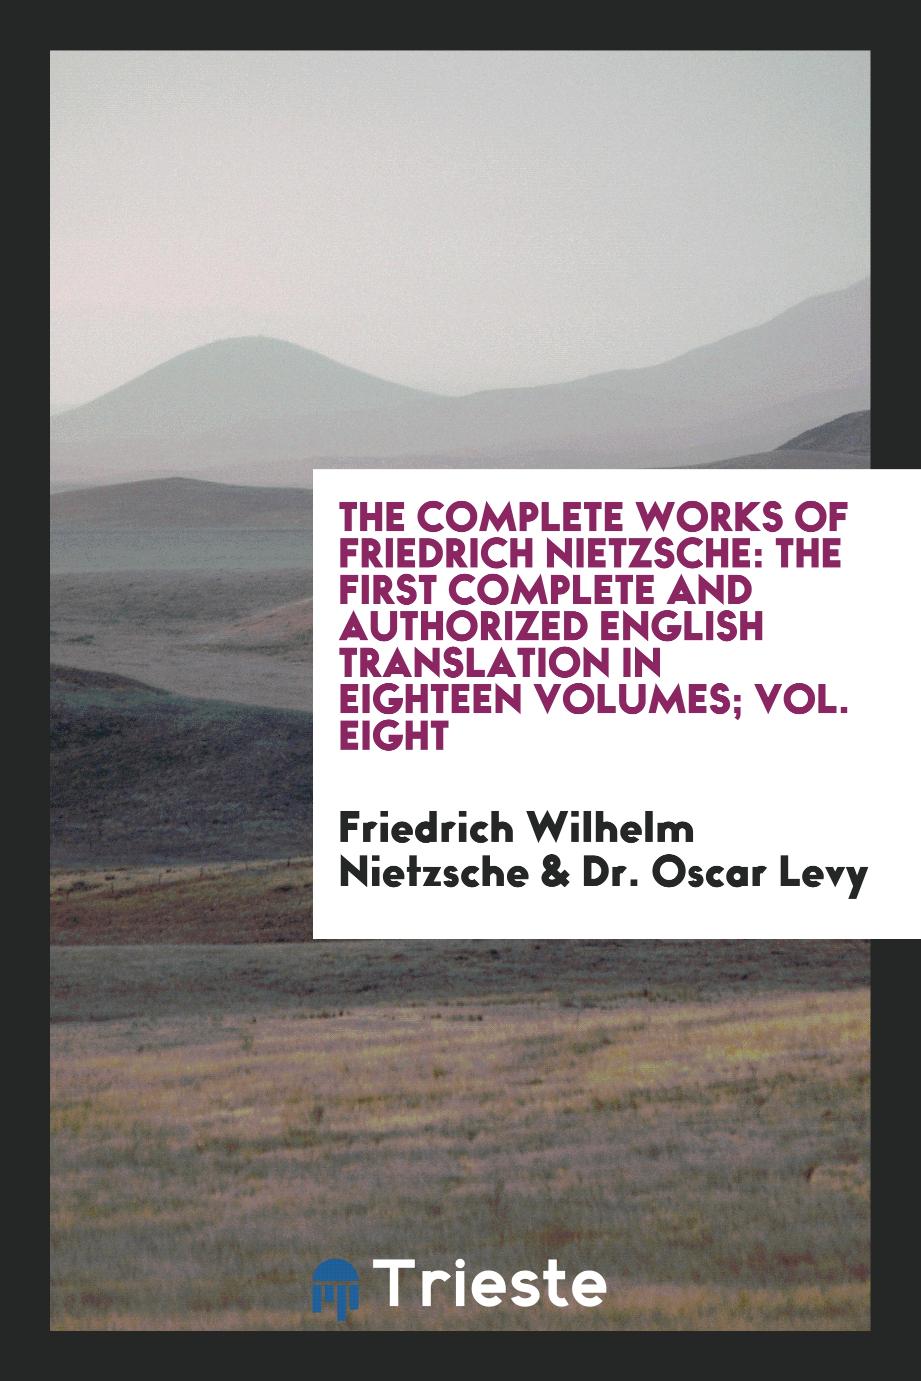 The complete works of Friedrich Nietzsche: the first complete and authorized English translation in eighteen volumes; Vol. Eight